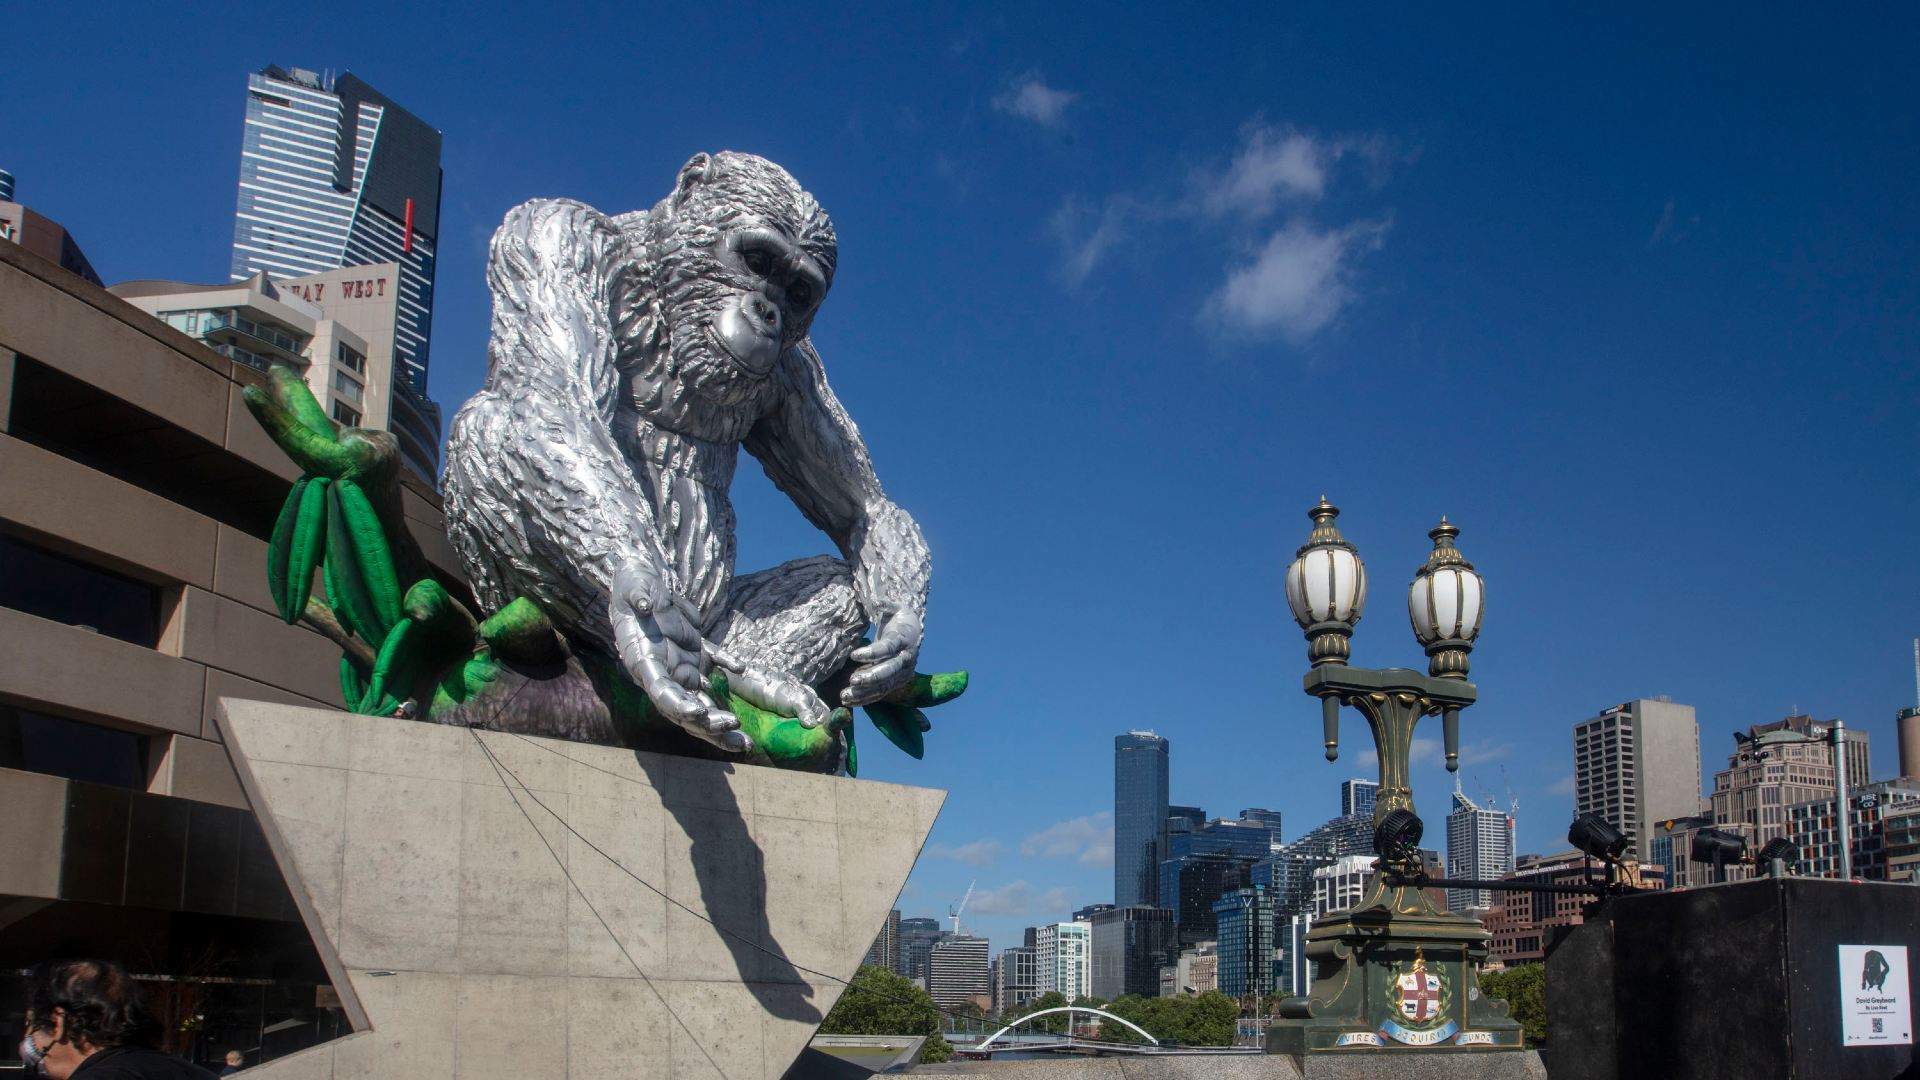 A Towering Chimpanzee Sculpture Has Made Its Home Beside Hamer Hall